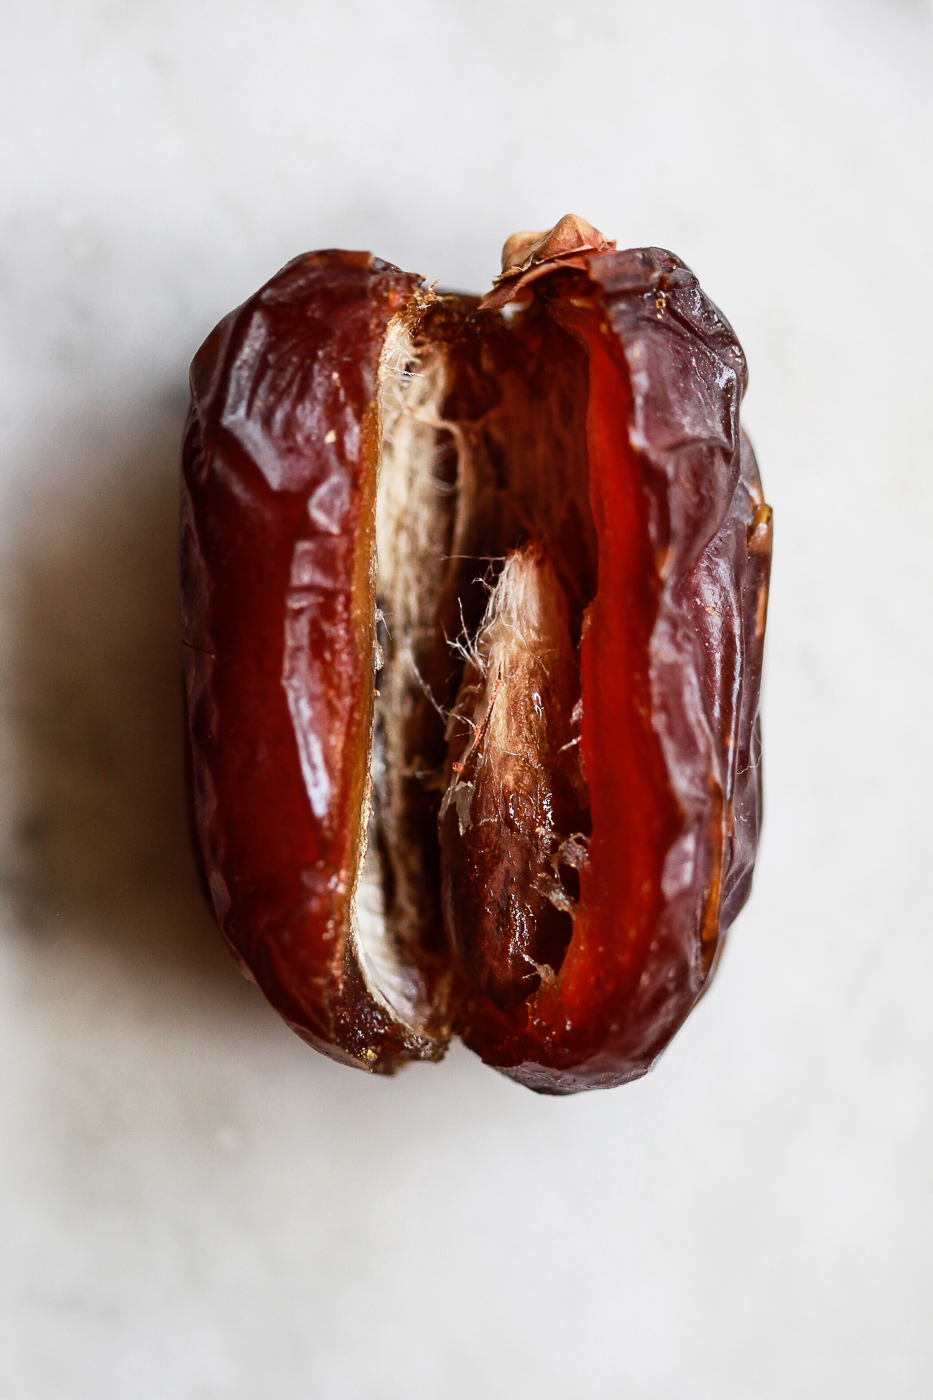 A macro photo of one Medjool date cut open to reveal the pit. 